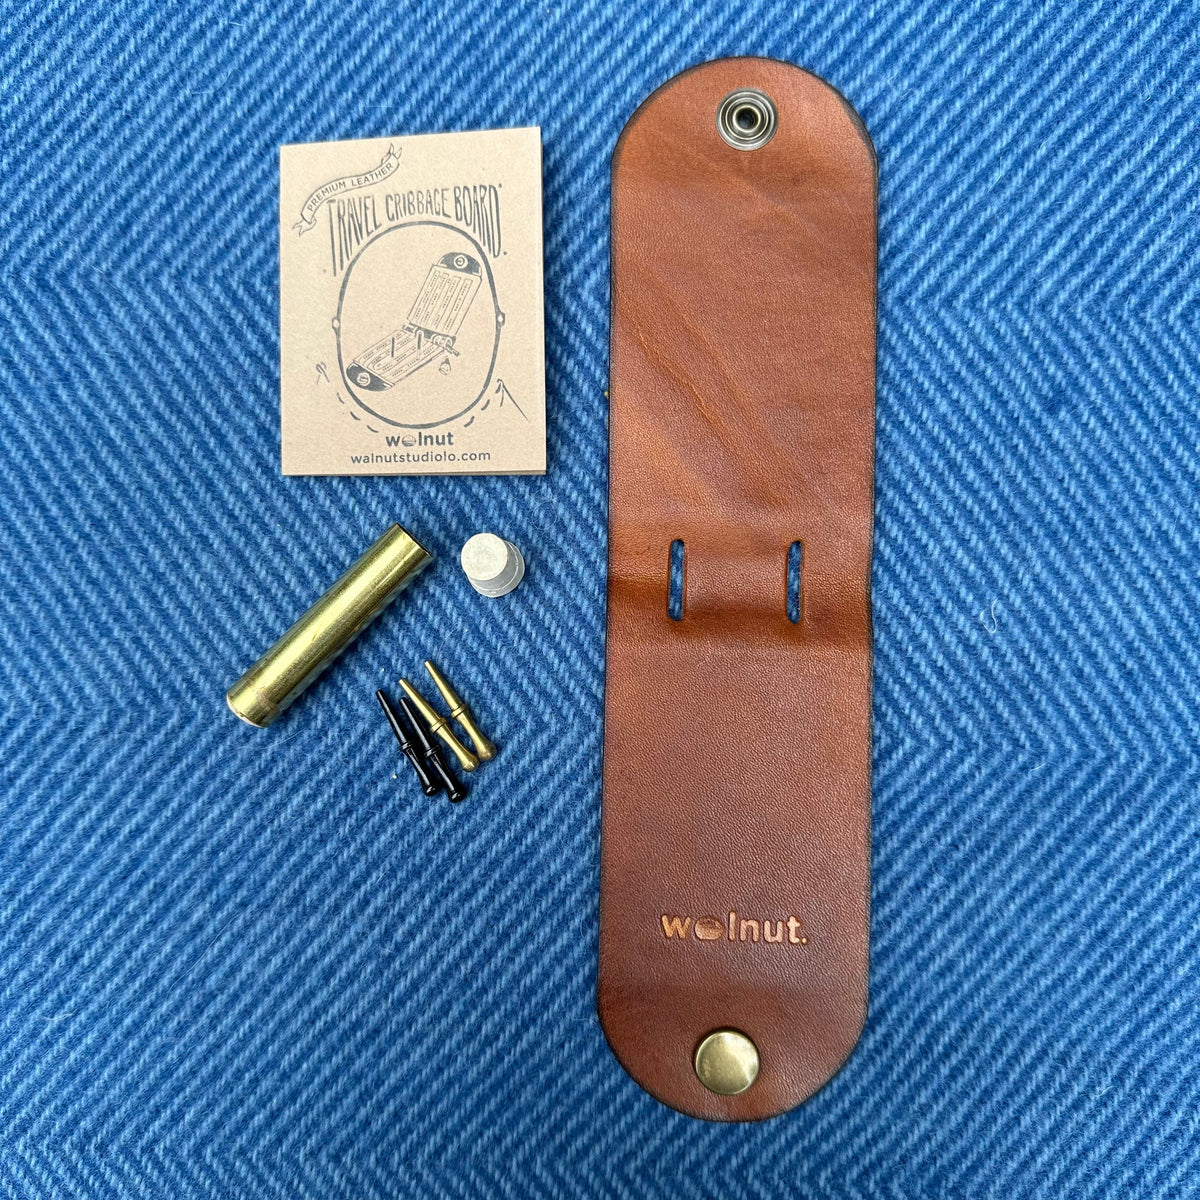 Walnut Studiolo AS-IS AS-IS SALE Original Travel Cribbage Board Rough Leather / Light Dye Color, New Cast Peg Tube, Board Only, 1 of 20 Similar to Picture (#007)